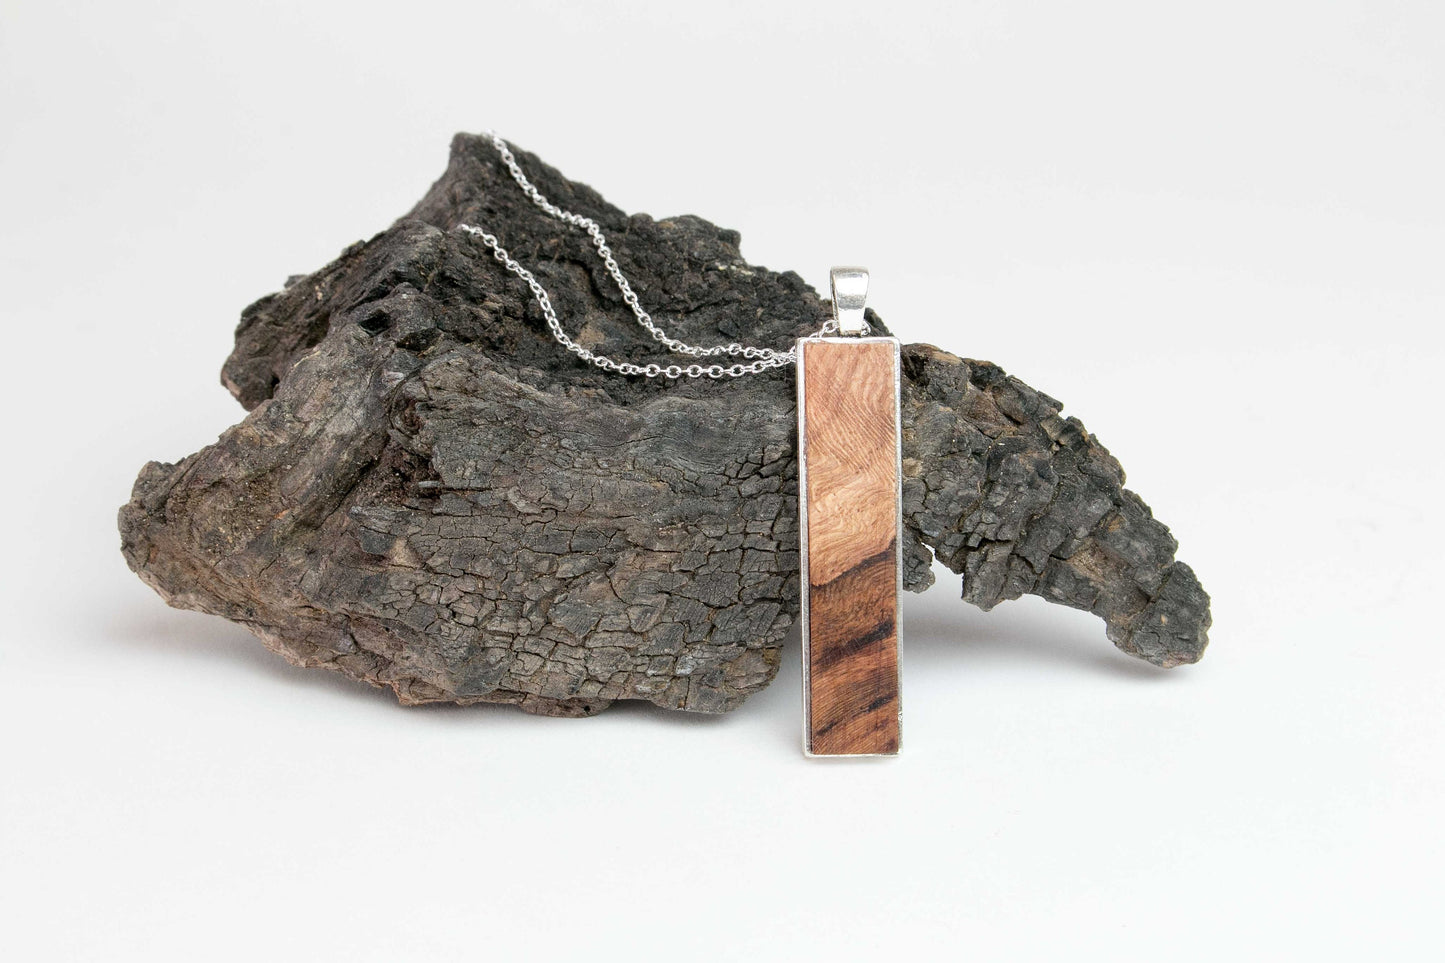 Grapevine Pendant Necklace - Adore - 100% Recycled!